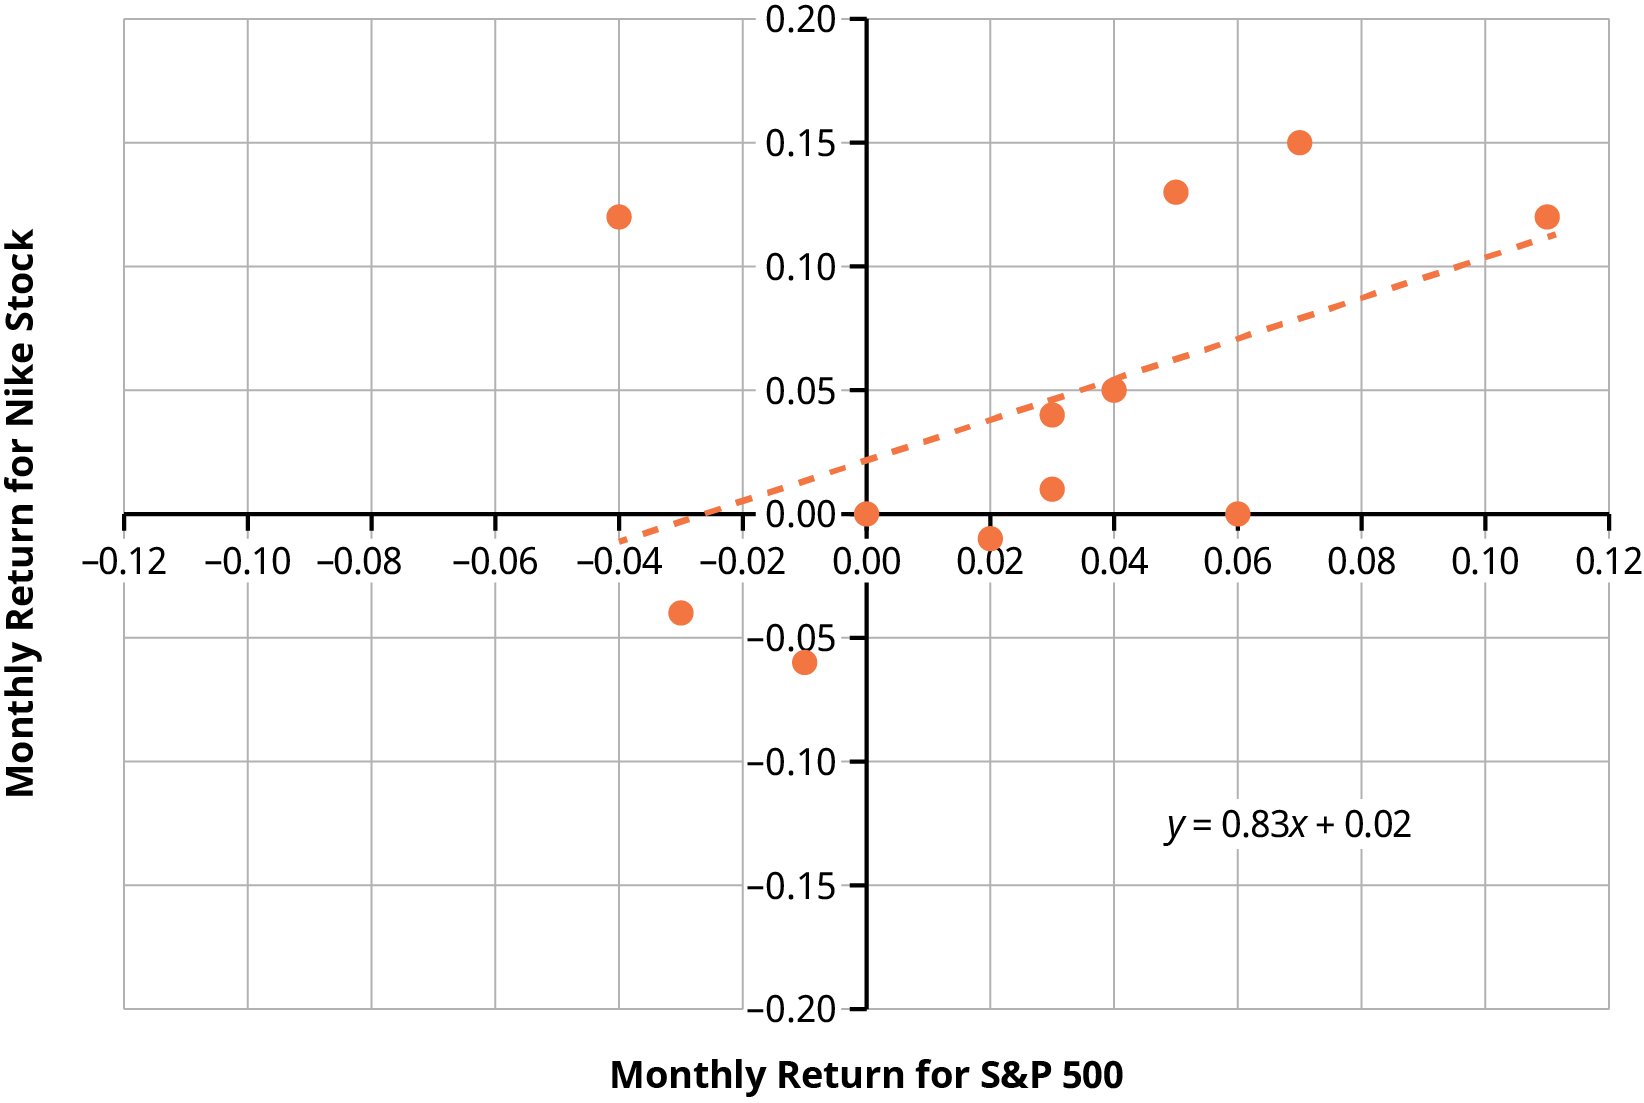 A scatter plot of the monthly return for Nike stock against the monthly return for the S&P 500 index shows a dashed regression line through the scatter points. This is a regression line corresponding to the slope of 0.83 and the formula y = 0.83x + 0.02.